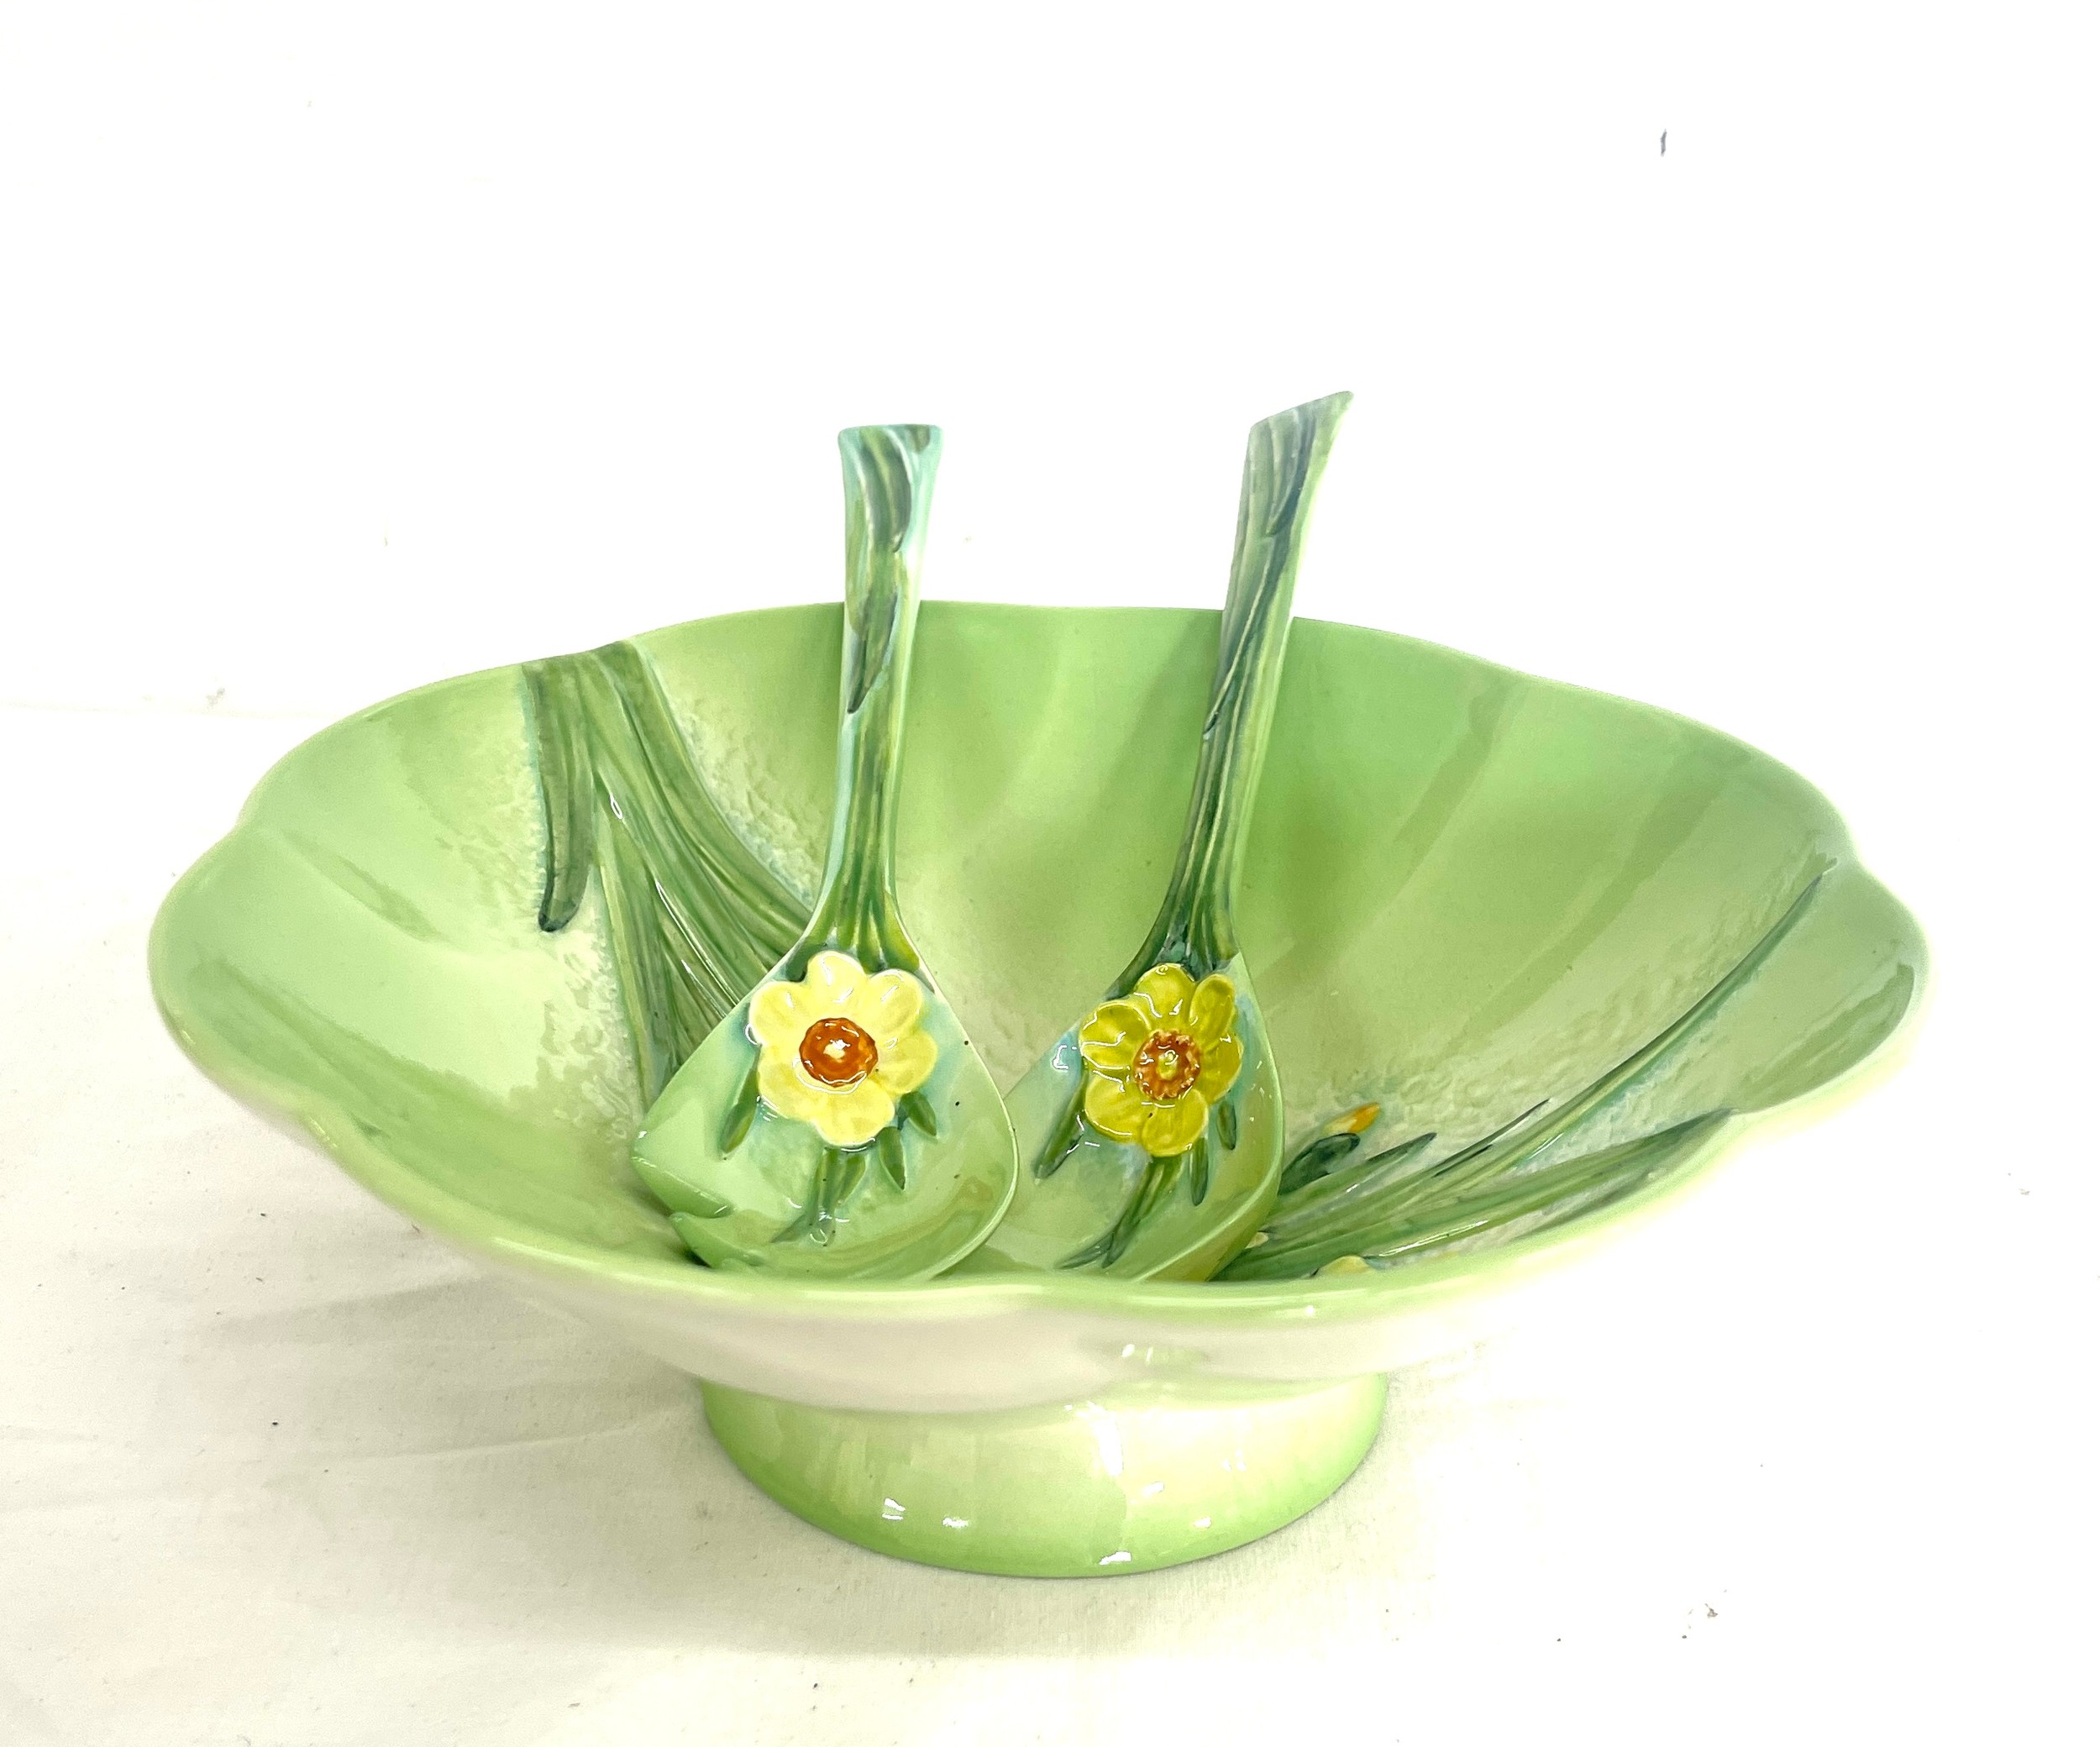 Beswick salad bowl and servers, good overall condition